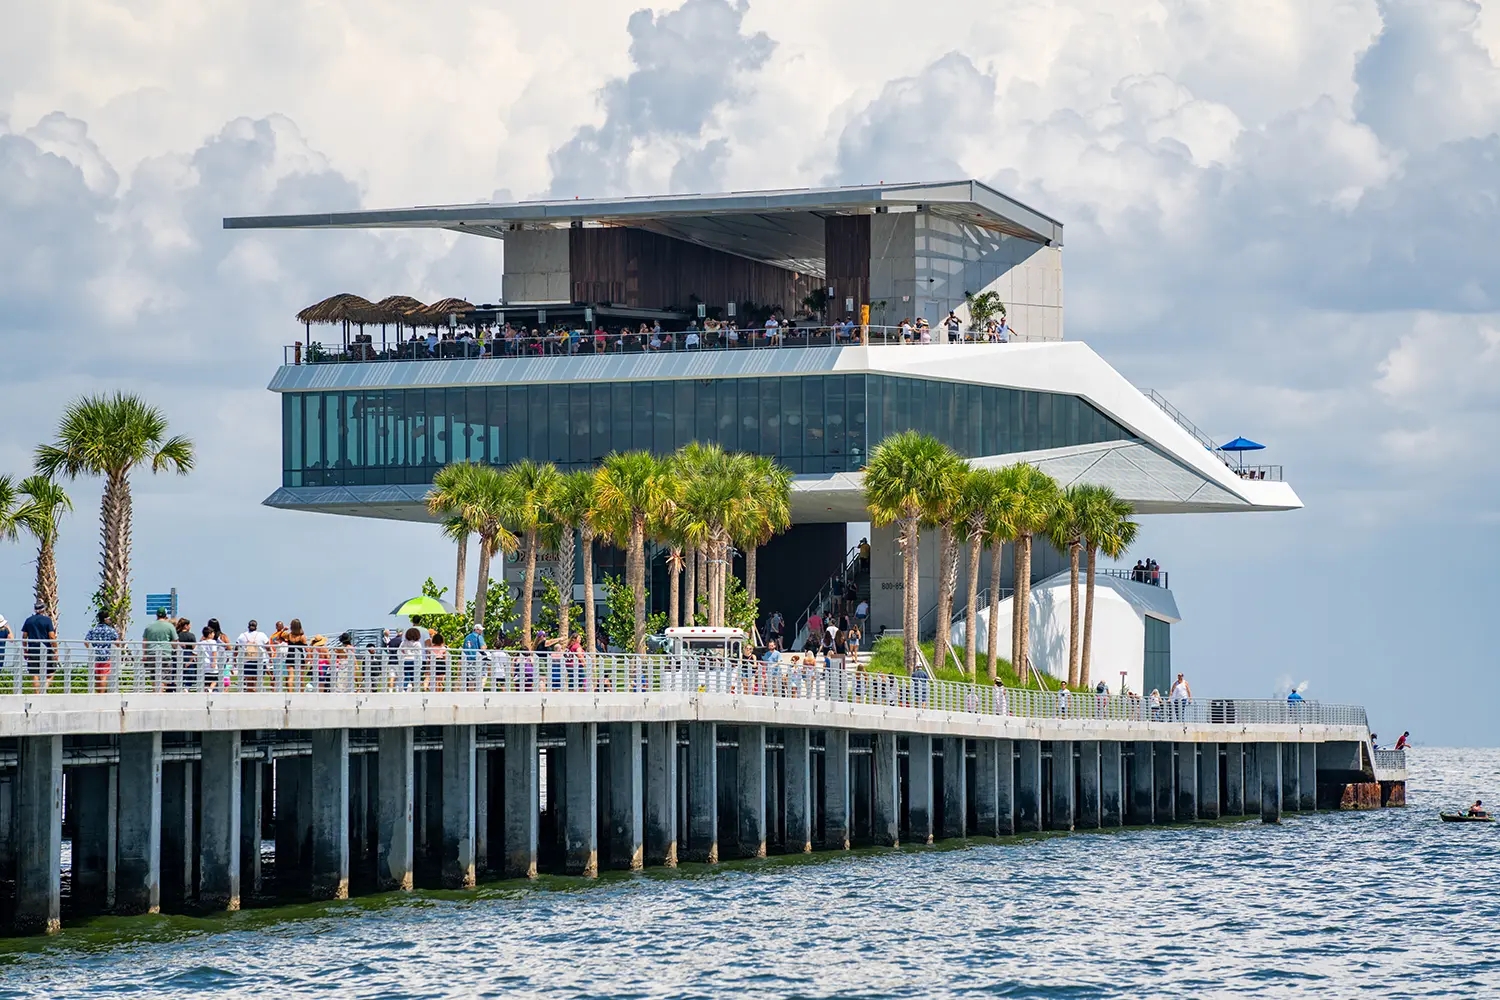 St Petersburg Pier crowded with tourists